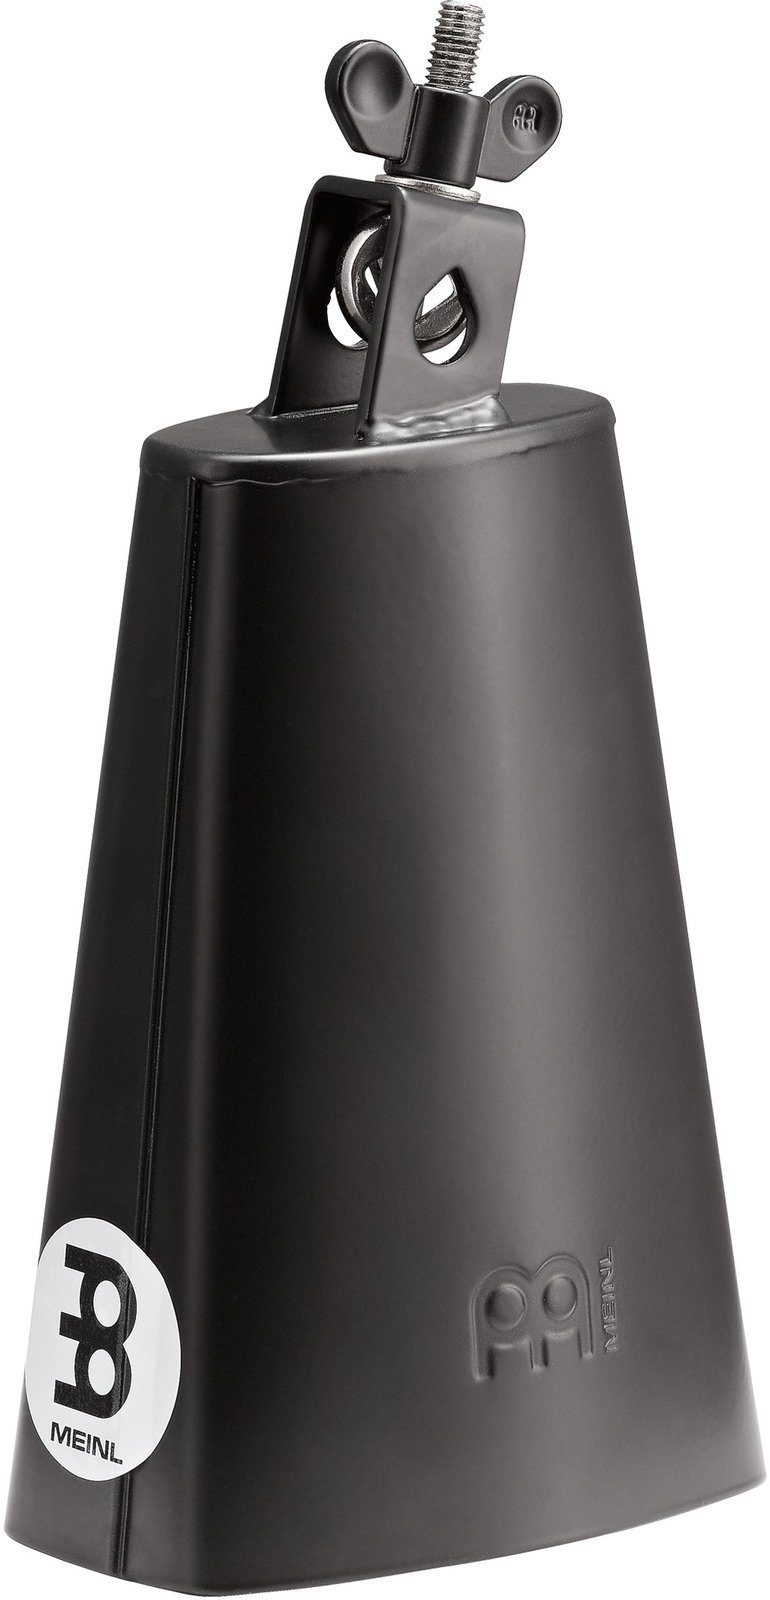 Percussion Cowbell Meinl SL675-BK Percussion Cowbell